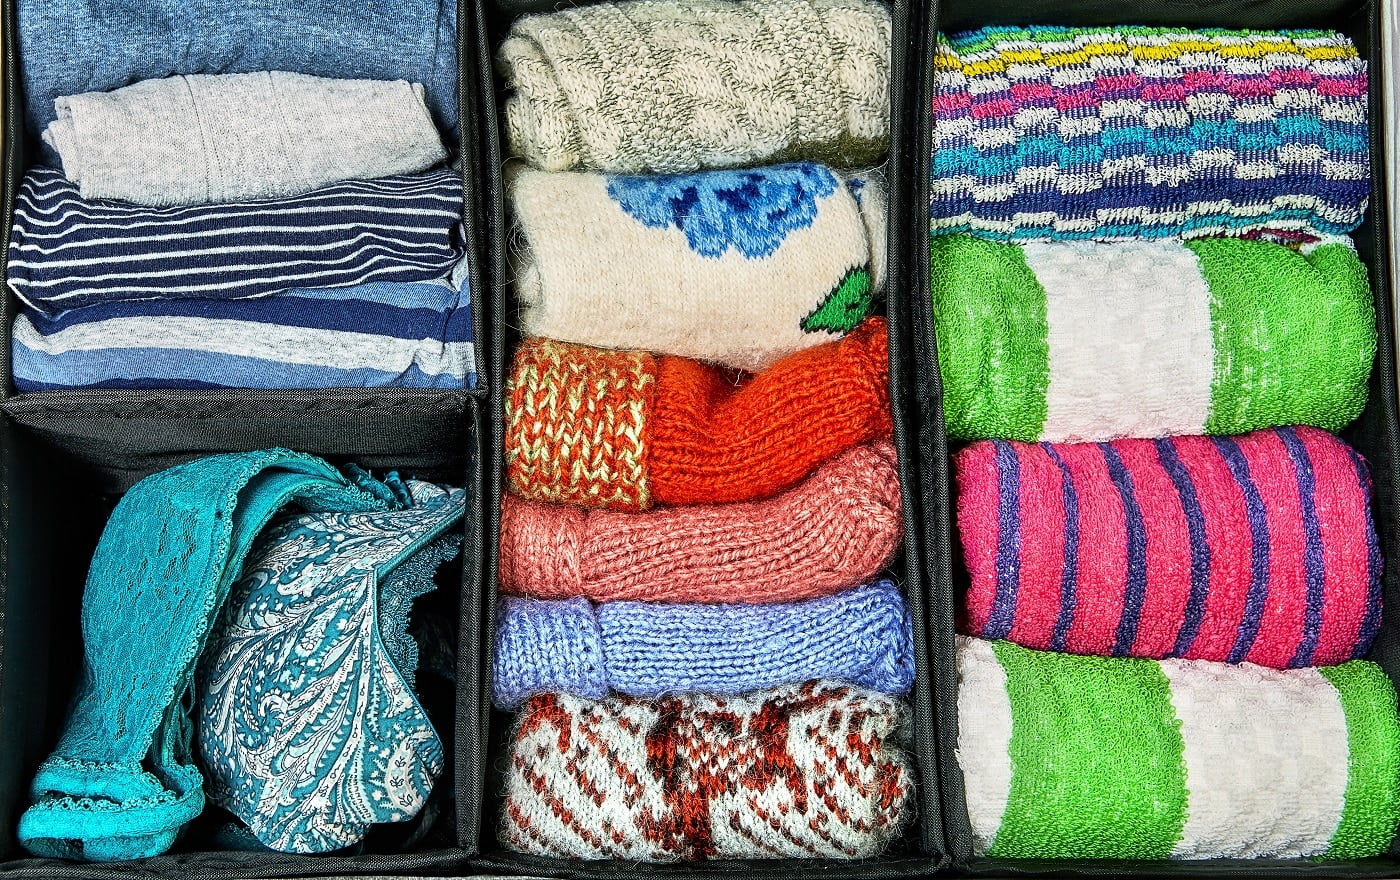 The fabric storage boxes they are organizers for dresser or closet which help divide up drawers and keep things separate.